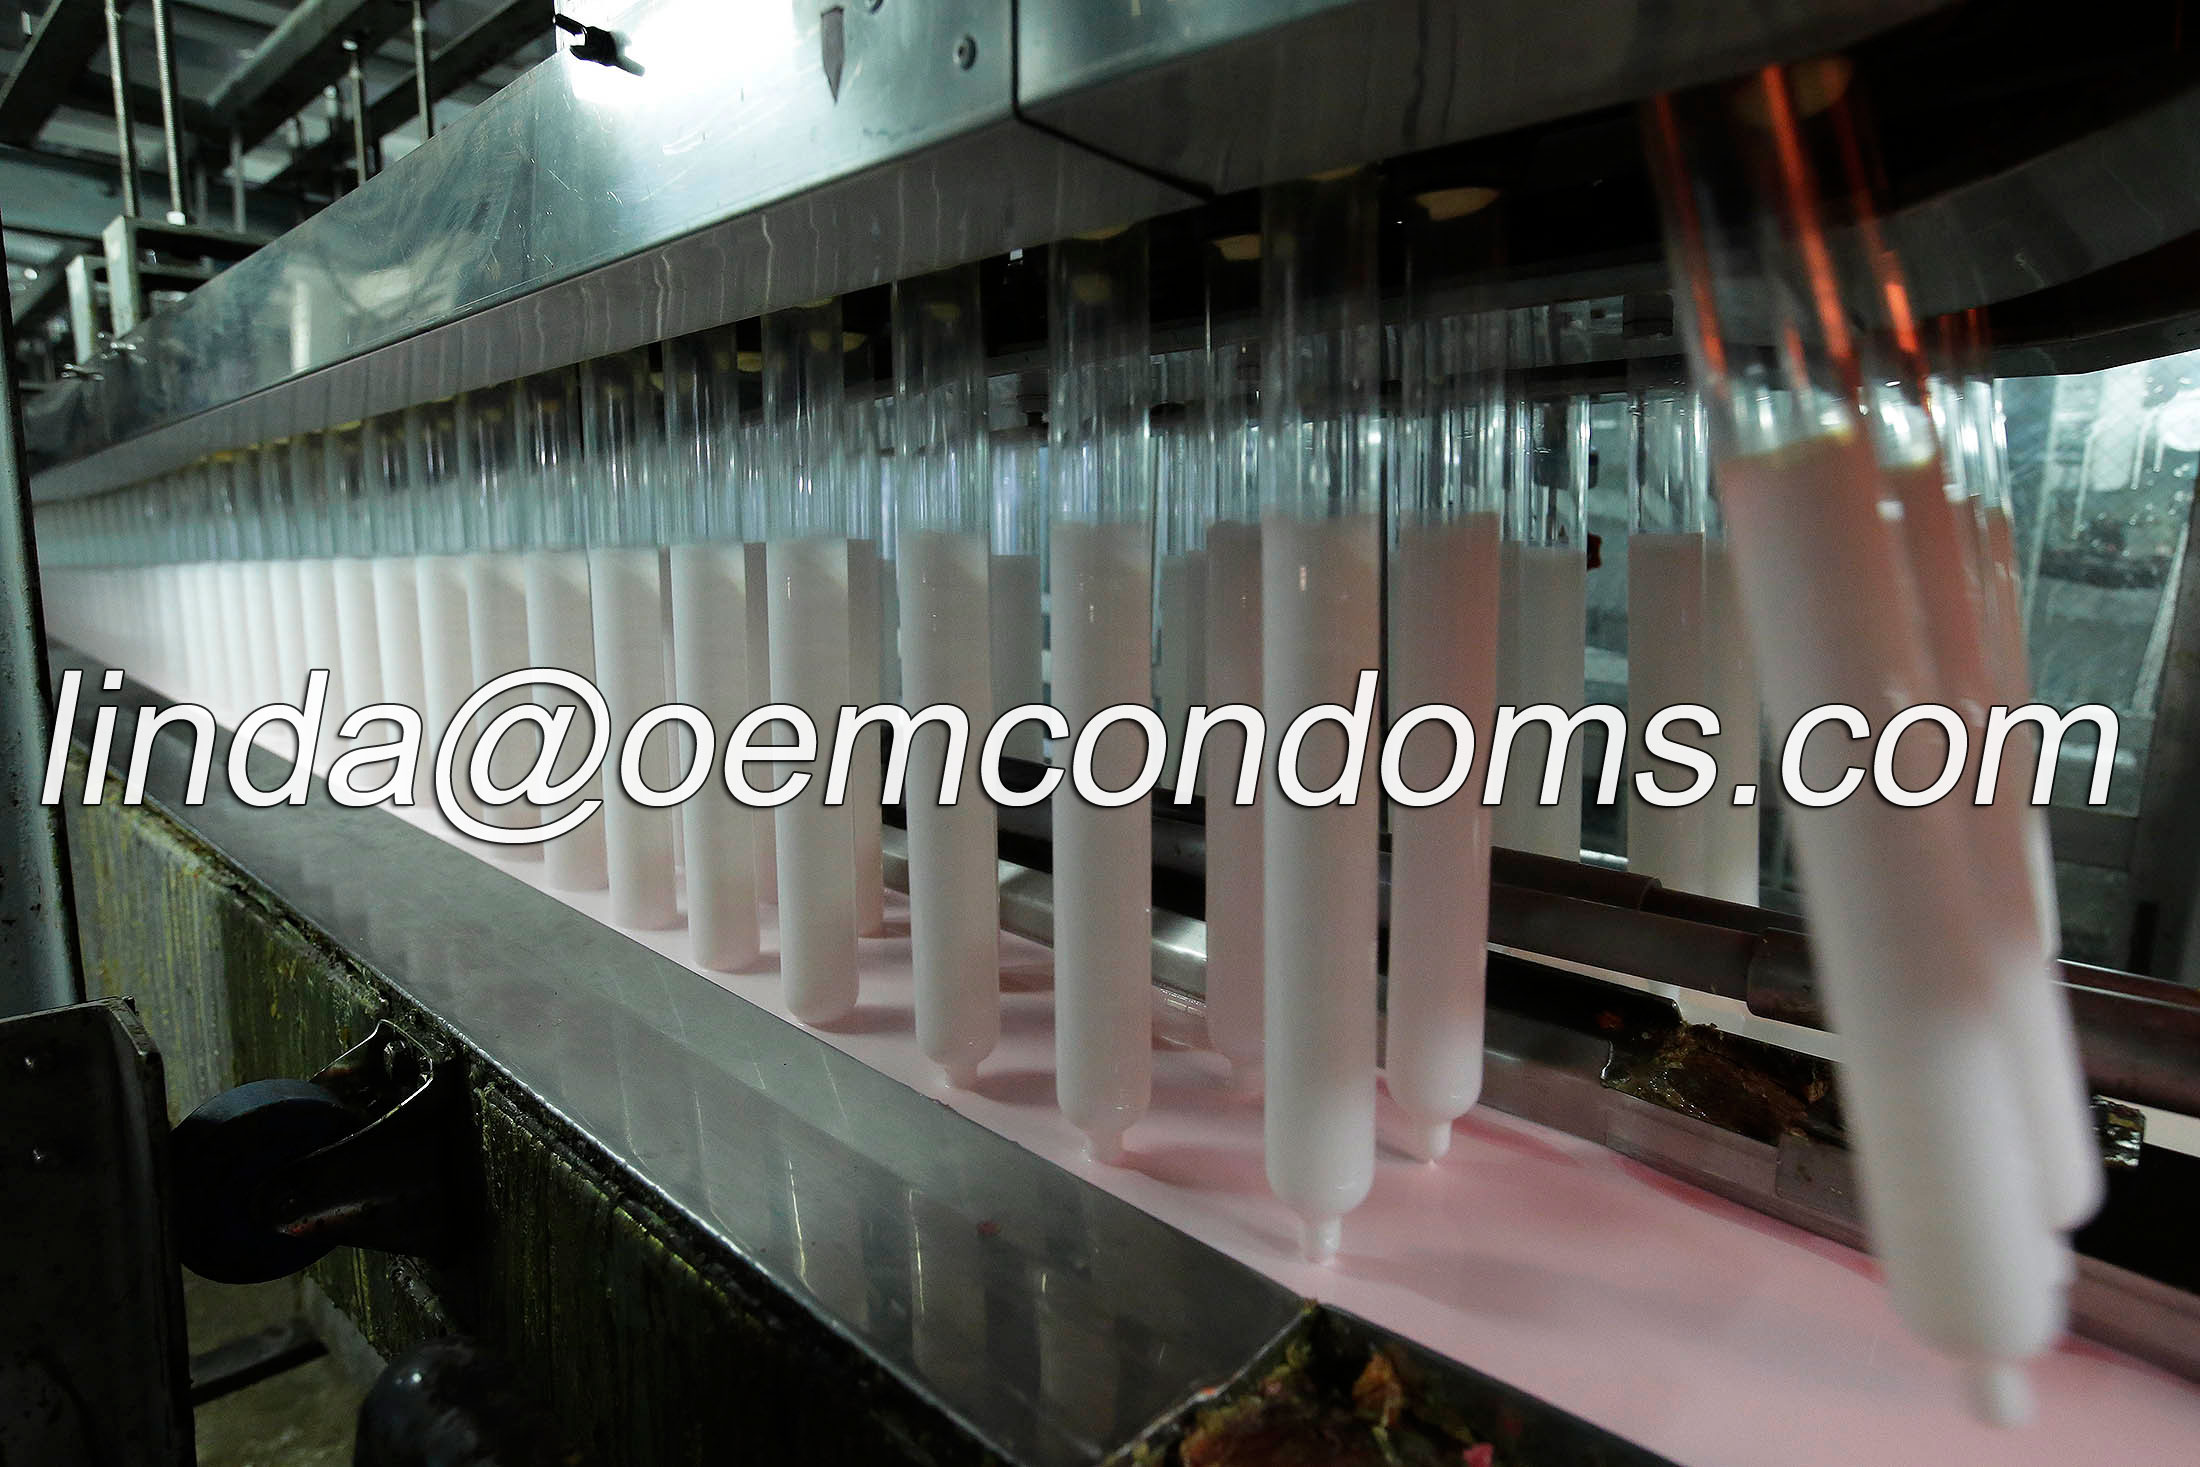 Cheap condom supplier from online store.